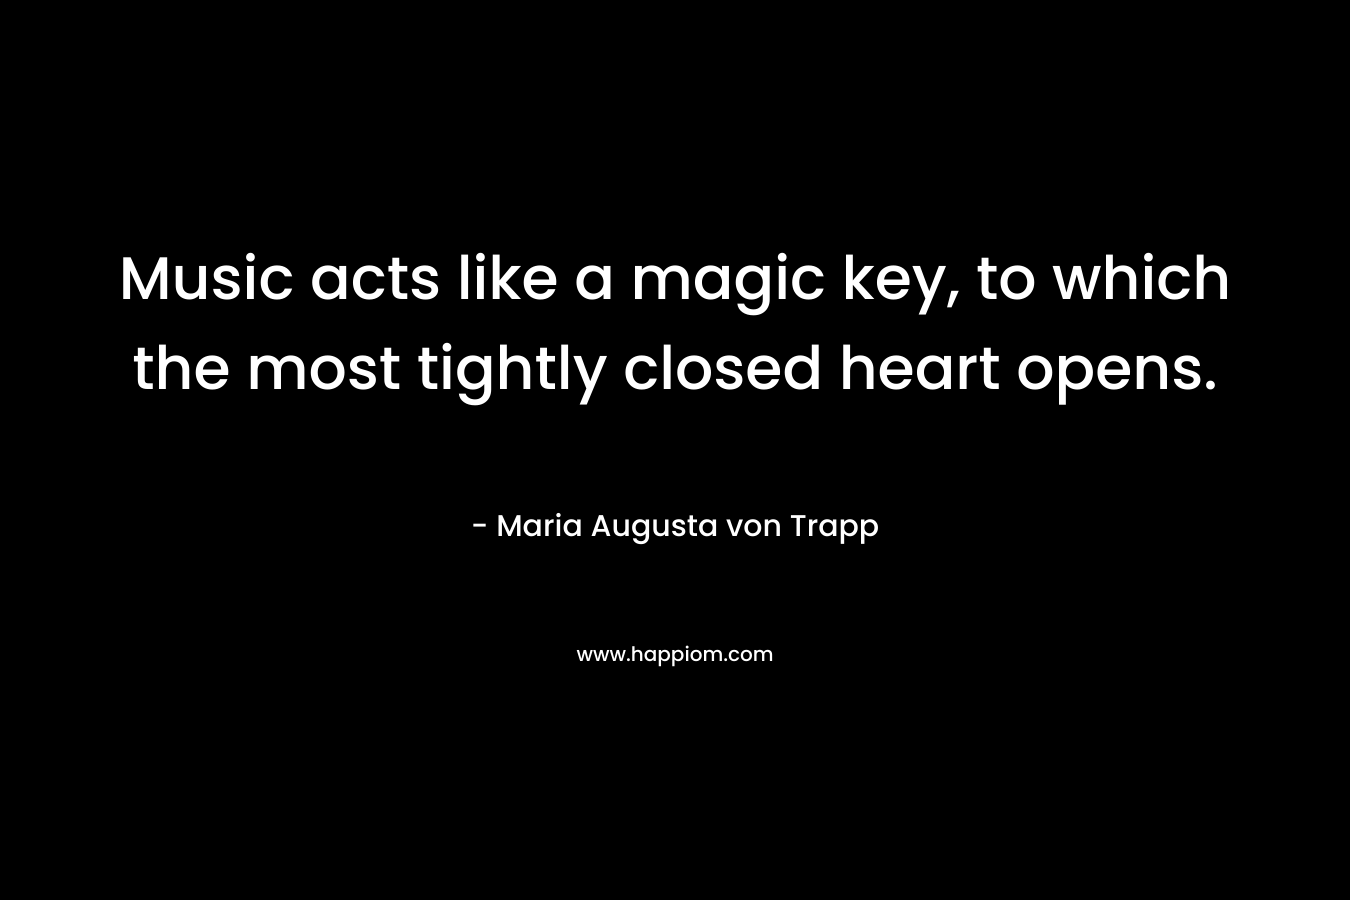 Music acts like a magic key, to which the most tightly closed heart opens.